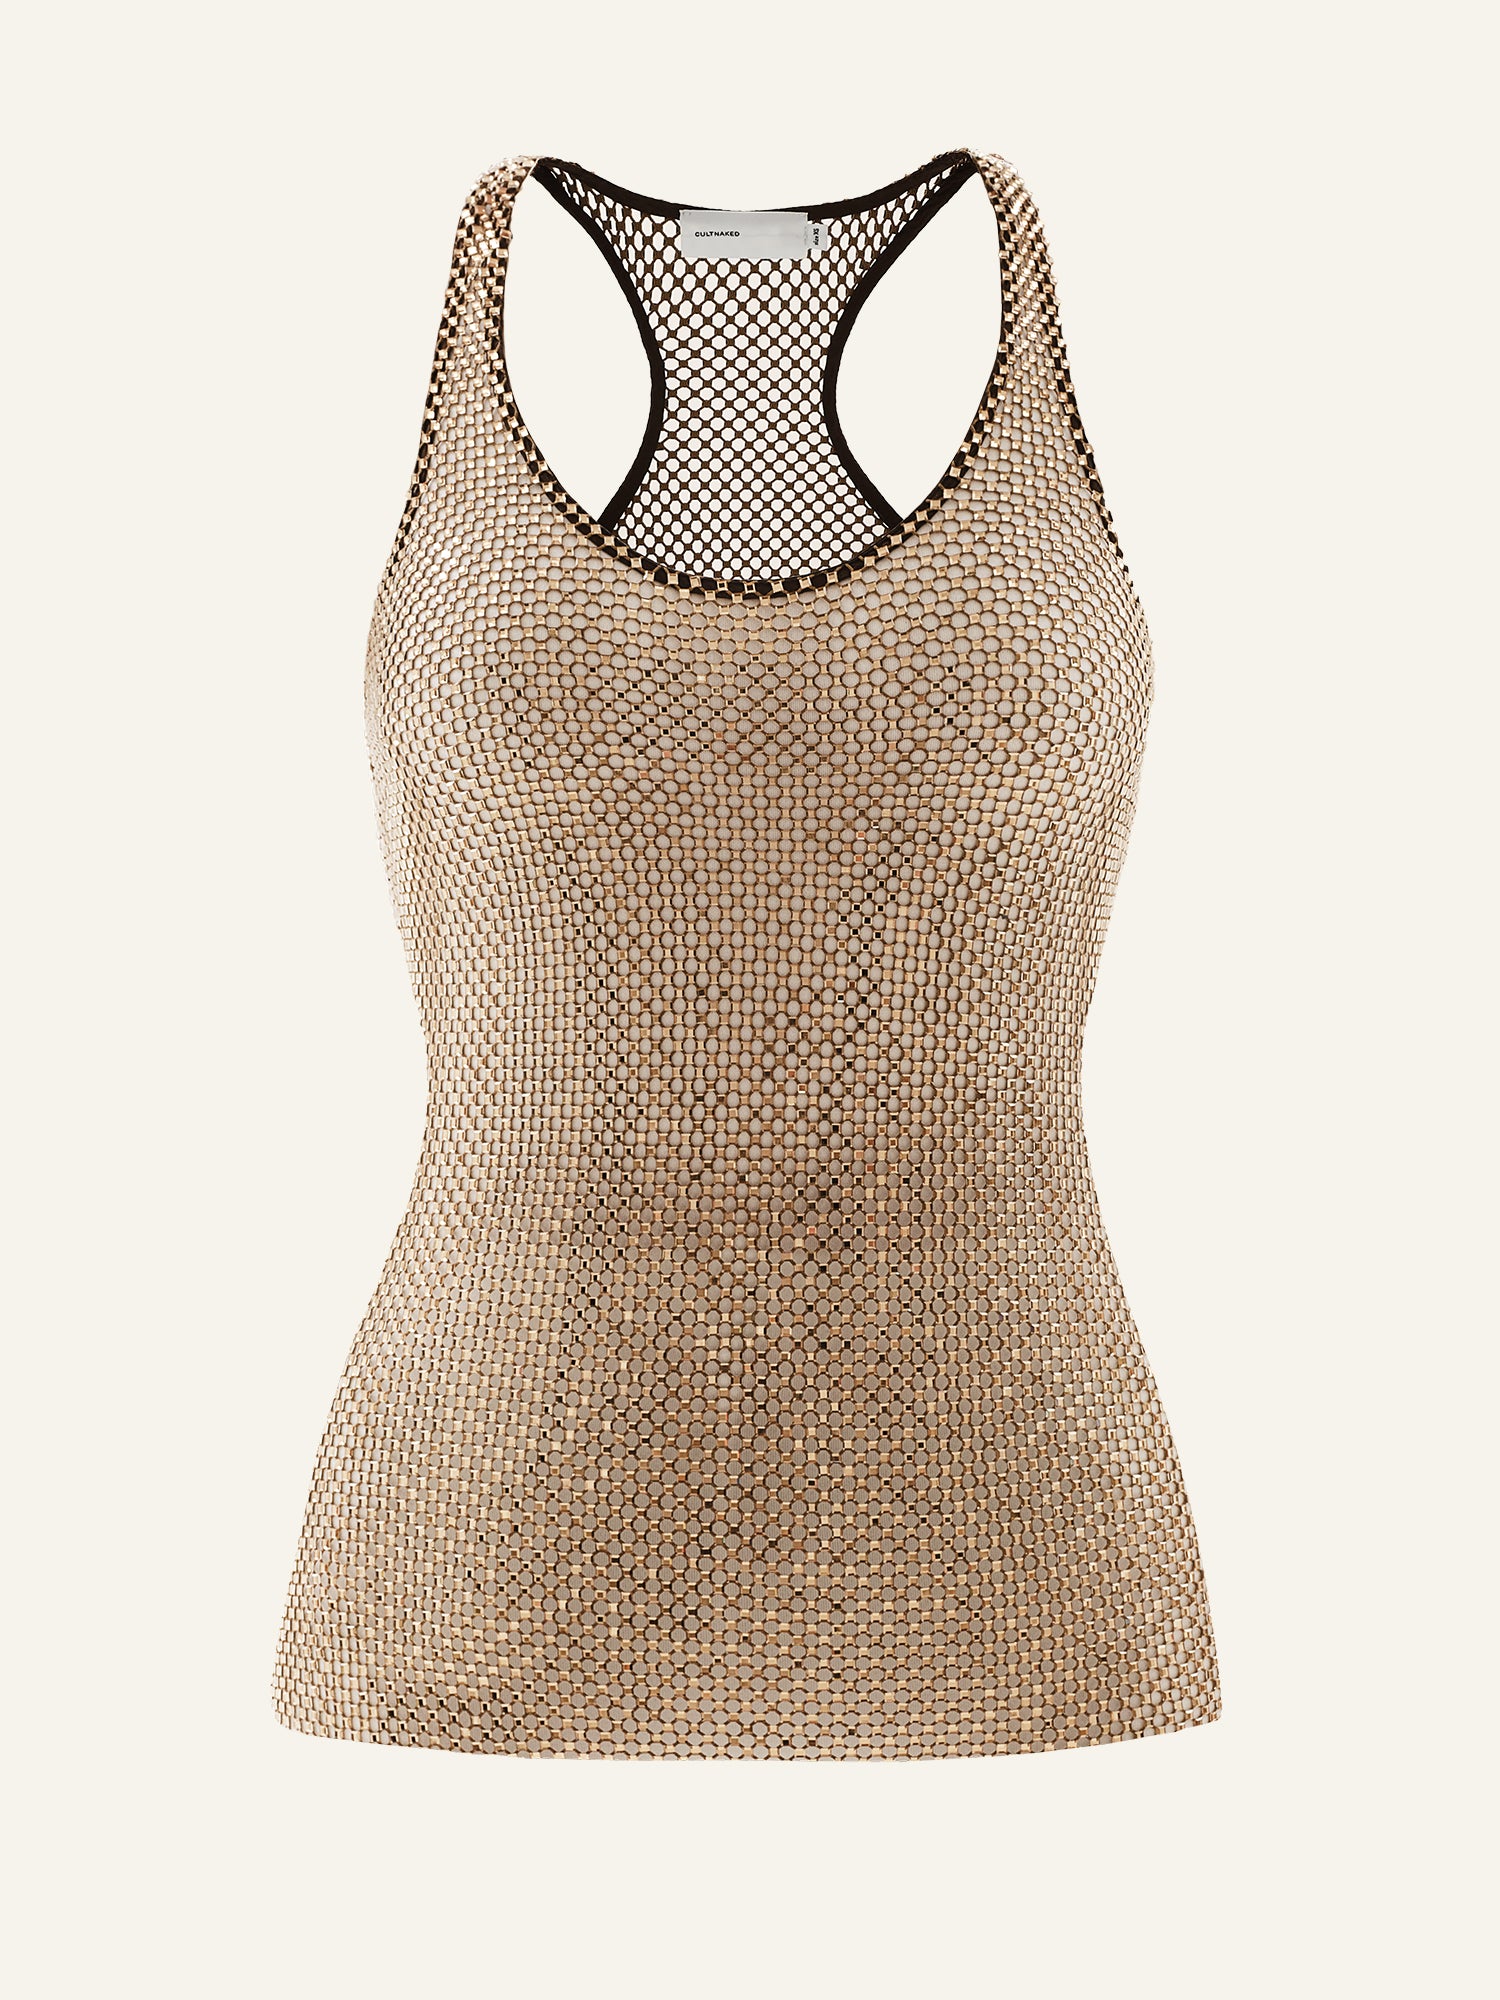 Product photo of a brown net tank top decorated with rhinestones